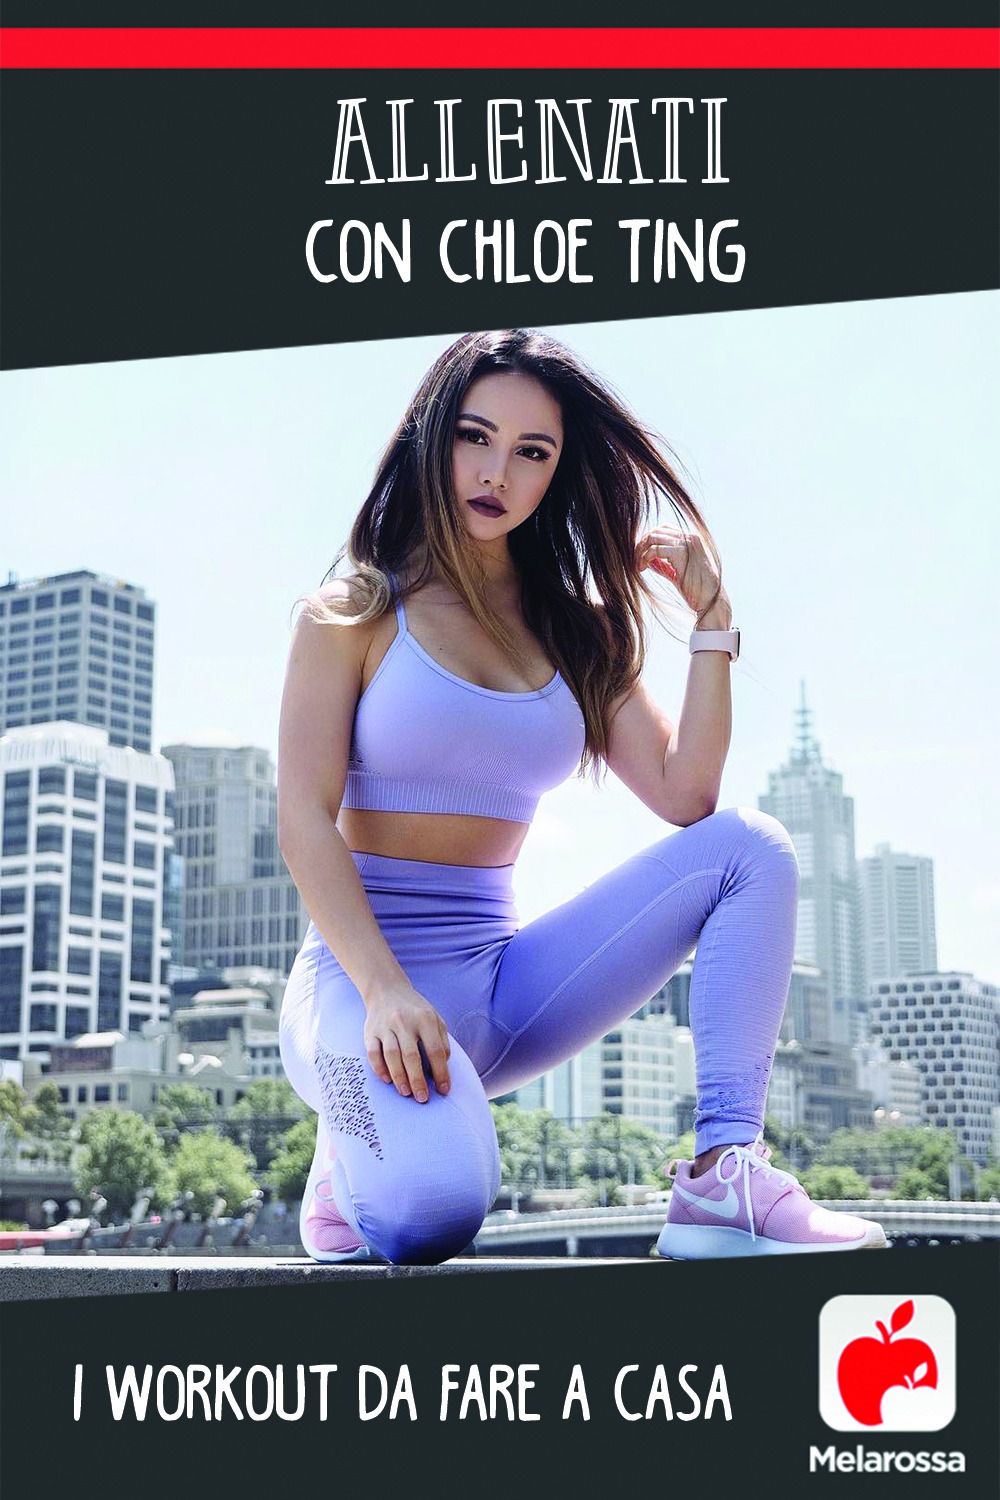 Chloe Ting fitness influencer 